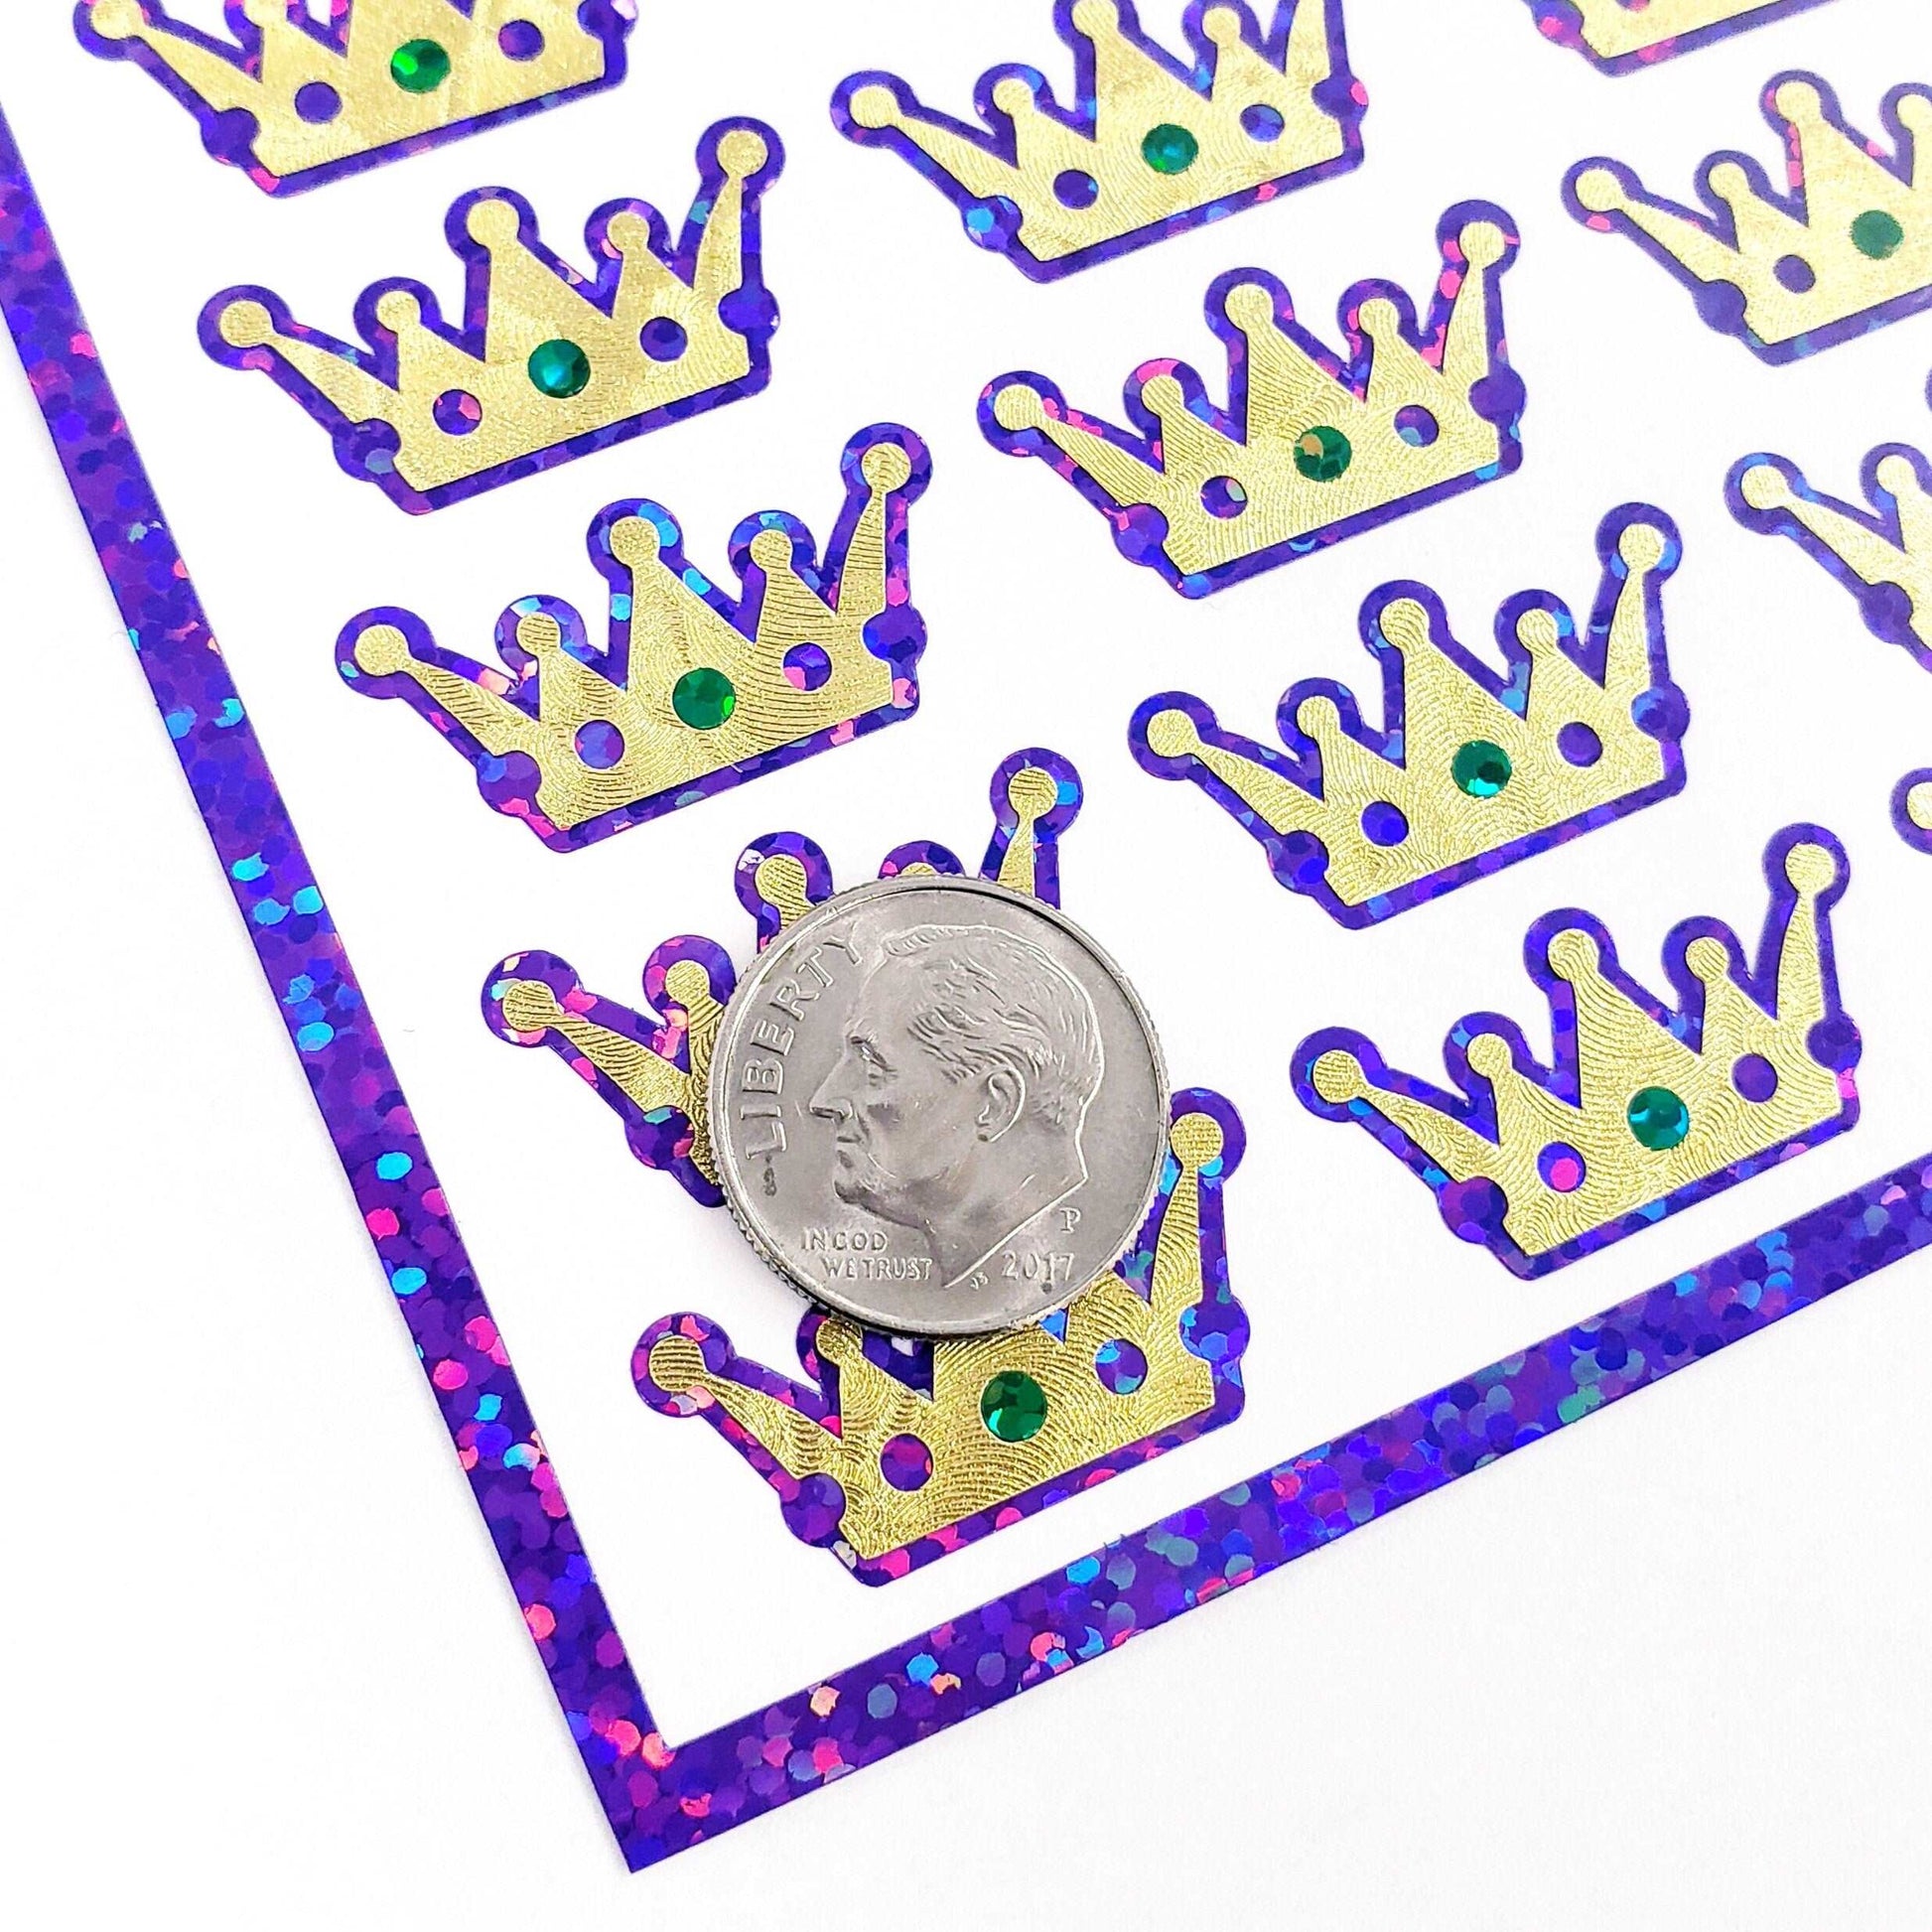 Mardi Gras Crown Stickers, set of 48 purple green and gold glitter stickers. Gold King crown stickers for Louisiana Fat Tuesday themed party